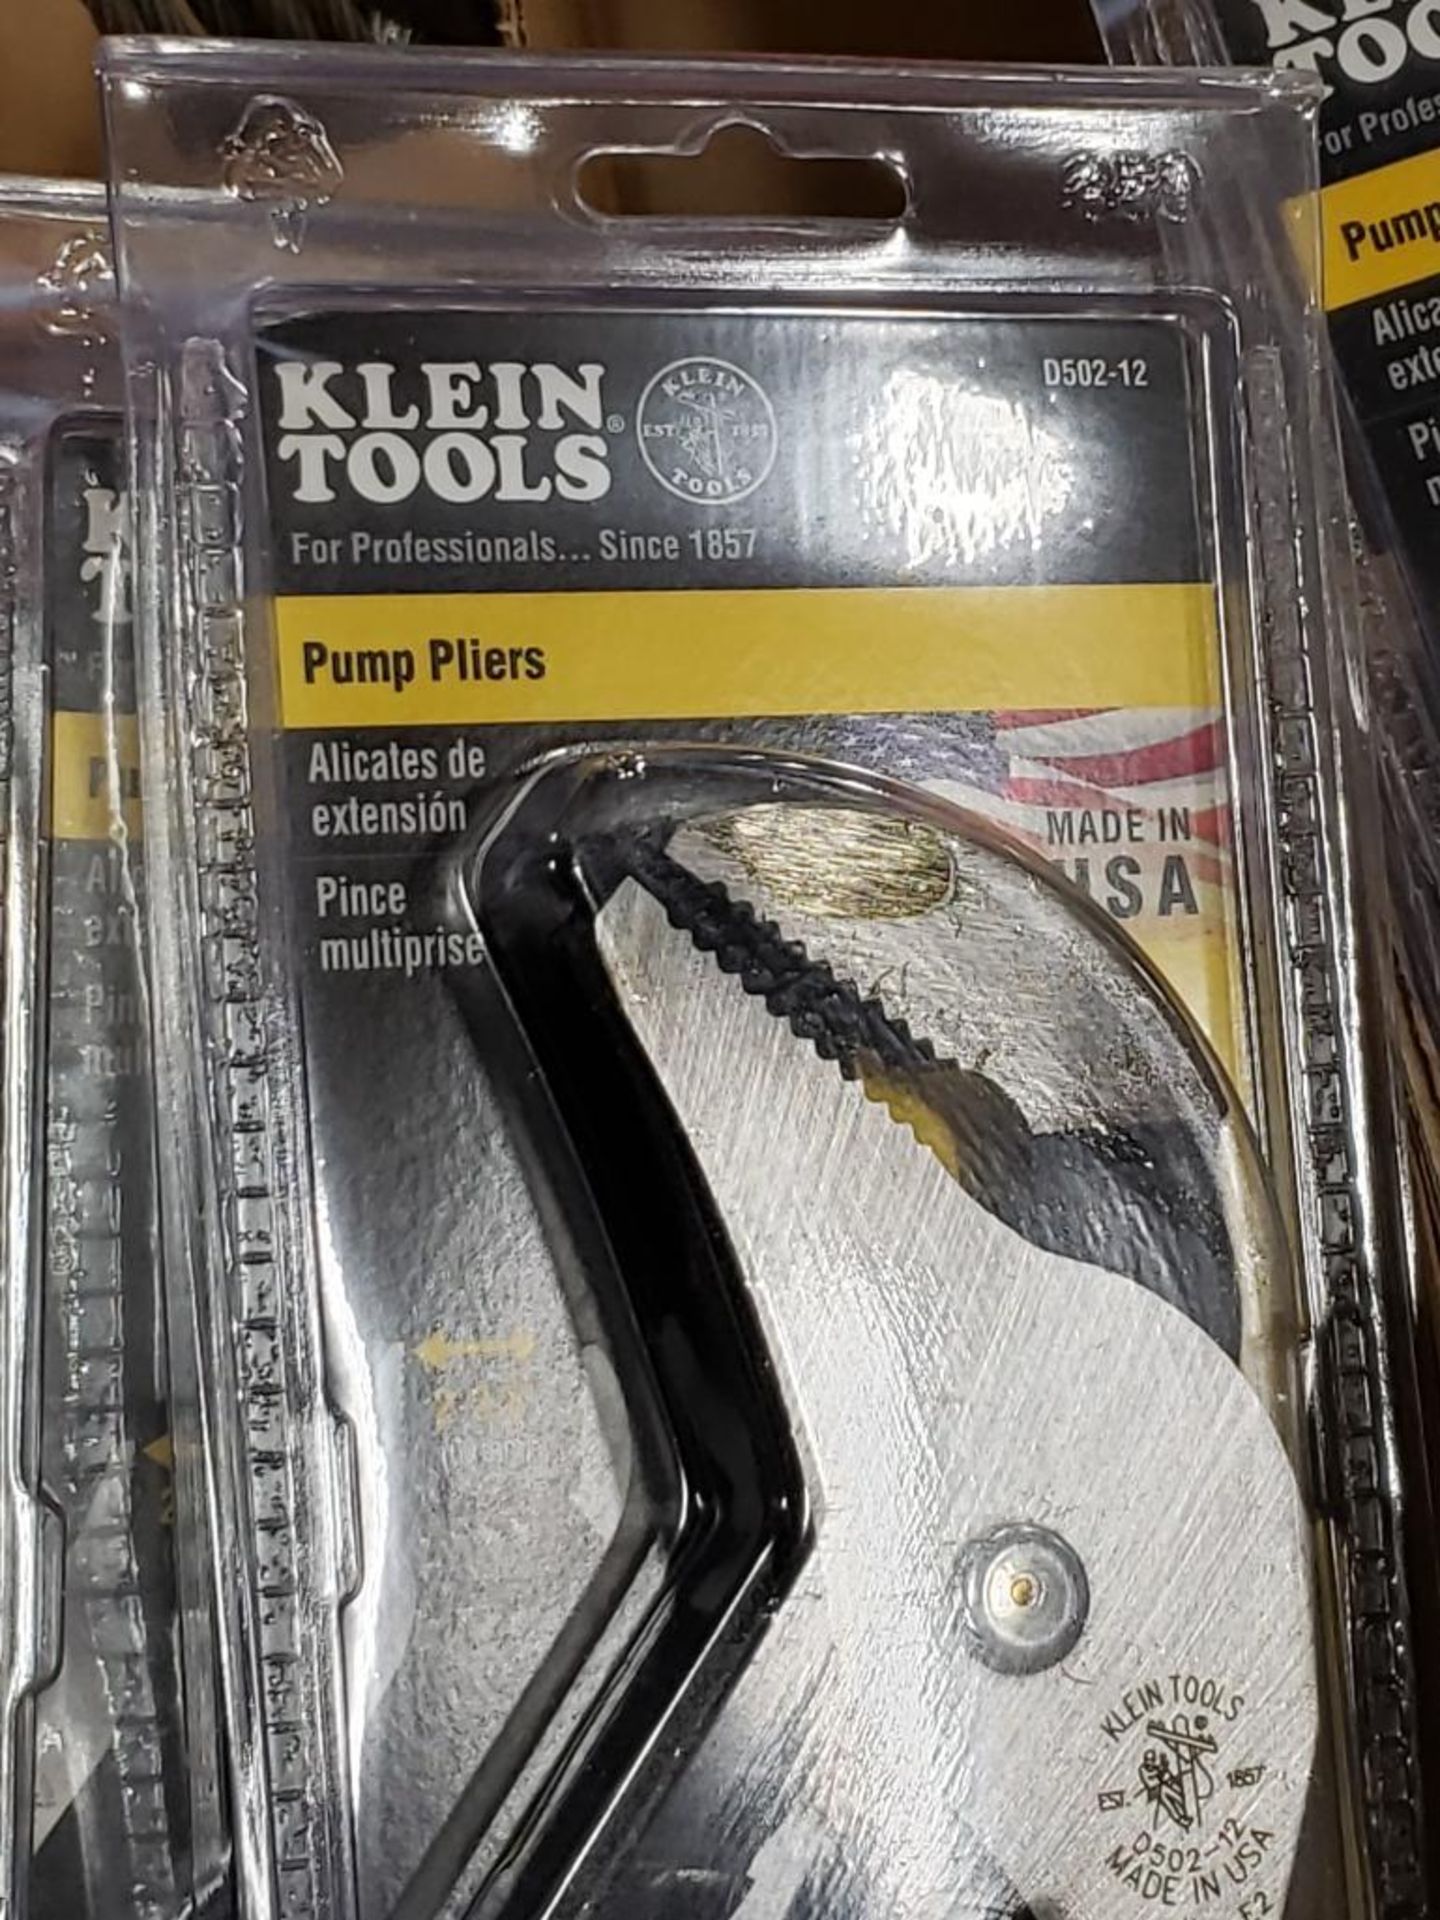 Qty 3 - Klein Tools D502-12 Pump Pliers. - Image 2 of 2